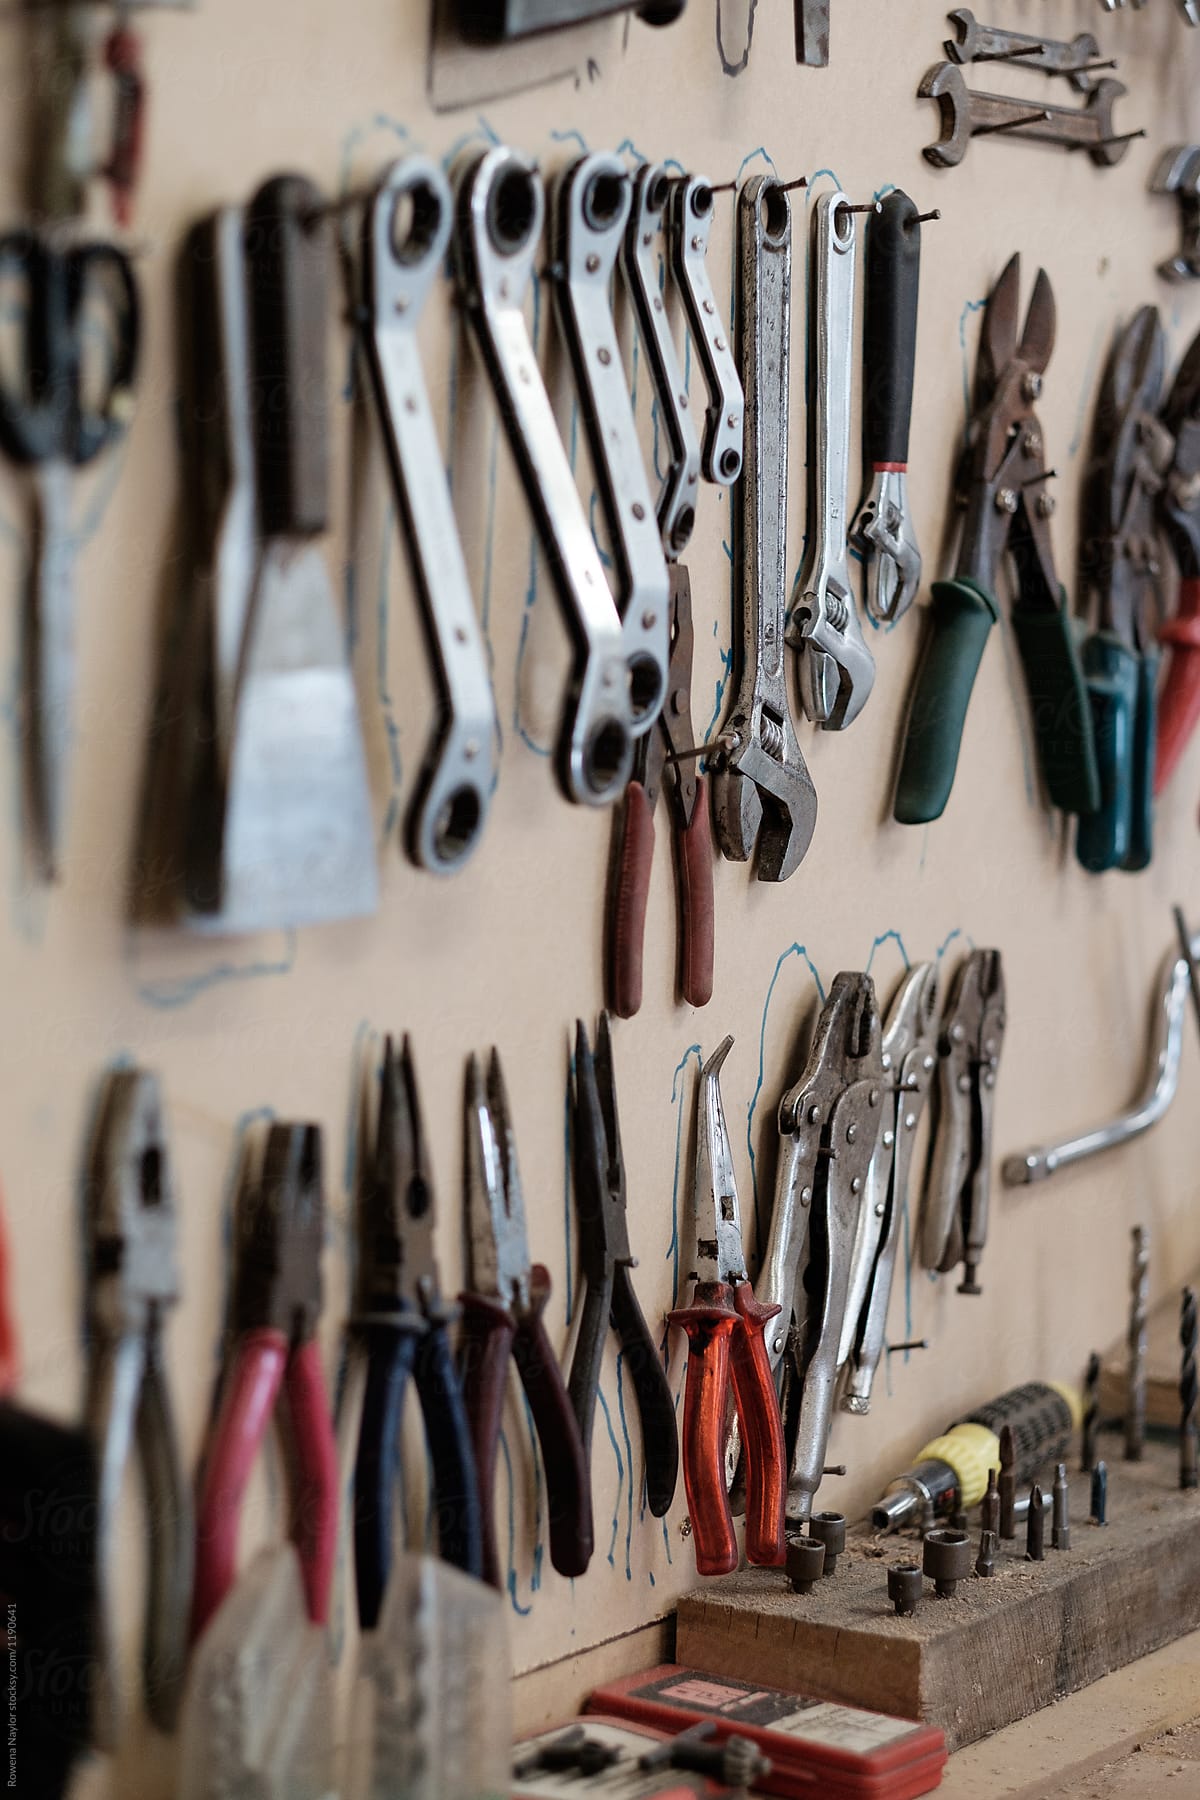 Organized tool shed